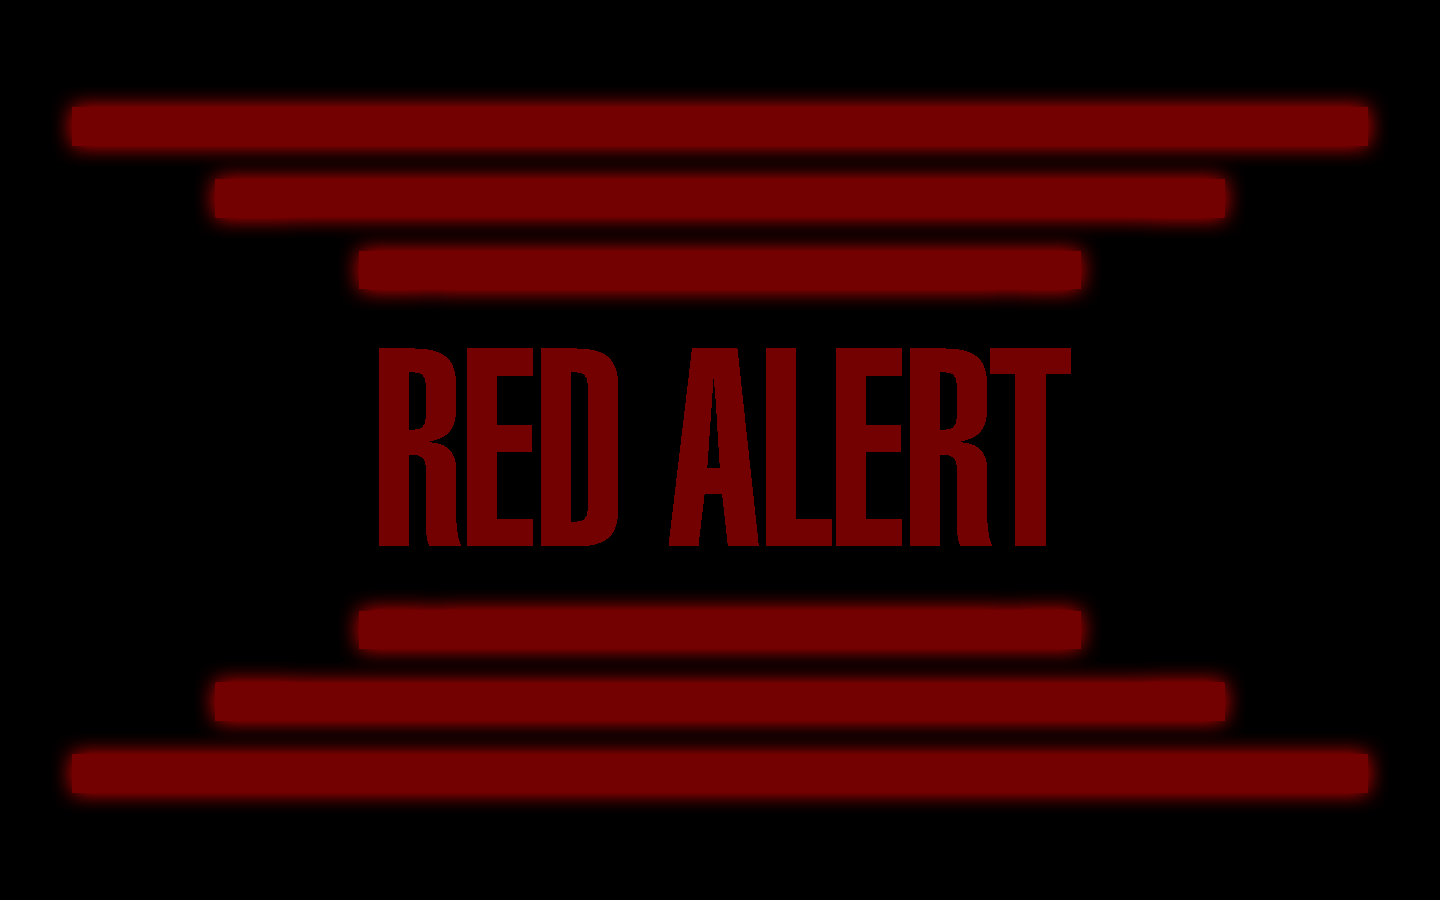 Red_Alert_animation_by_Balsavor.gif